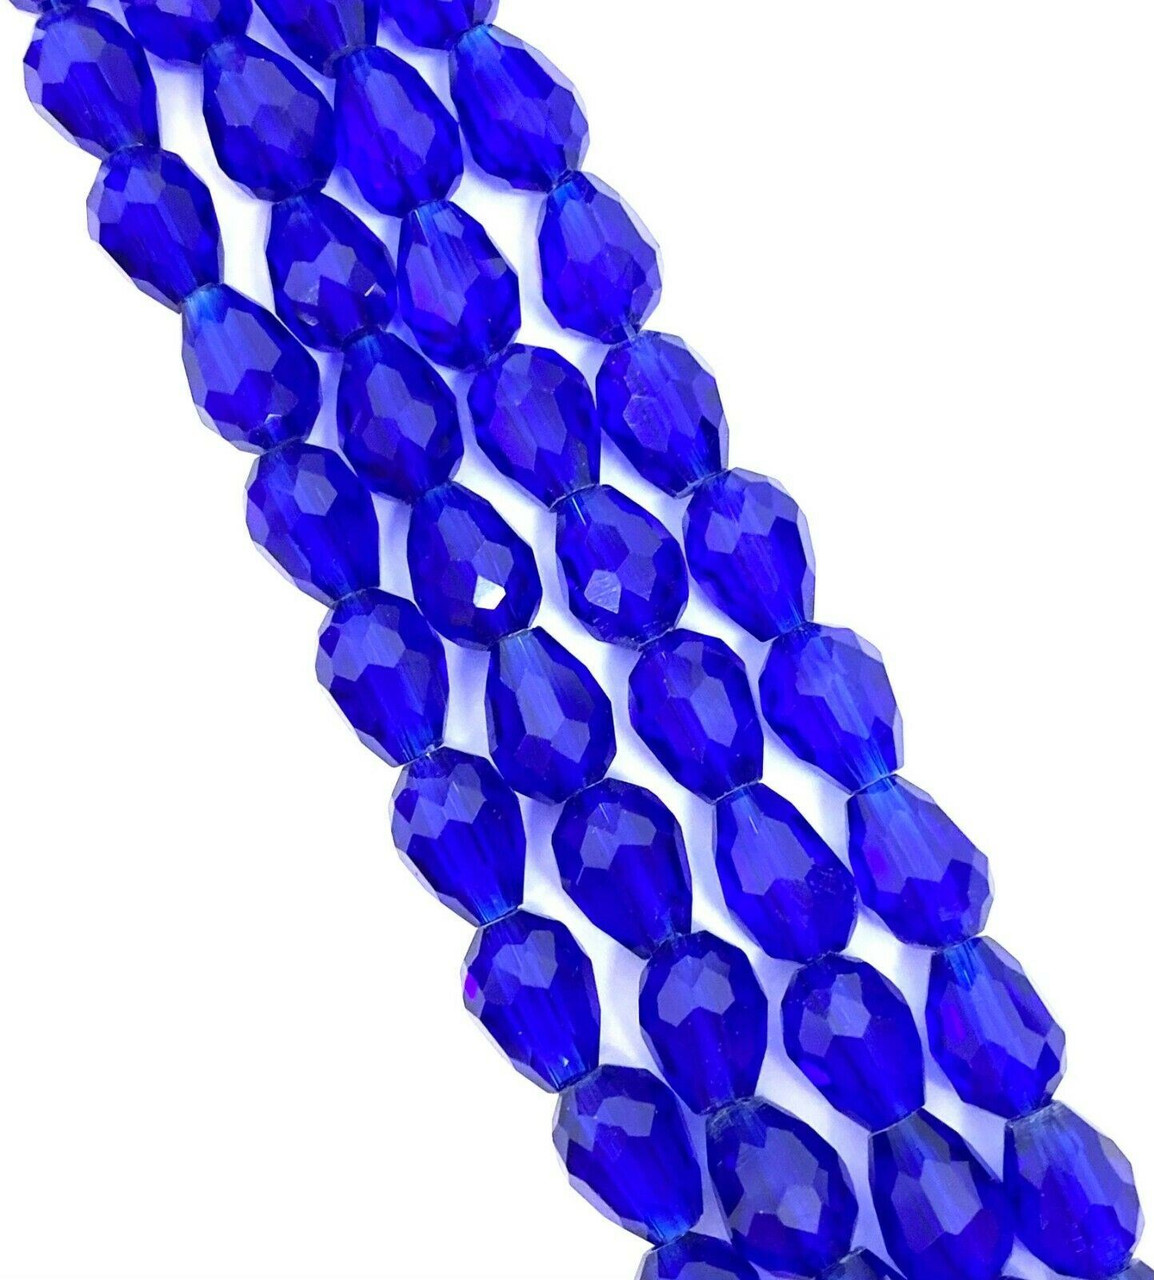 Strand of faceted glass drop beads (briolettes) - approx 11x8mm, Deep Blue, approx 60 beads